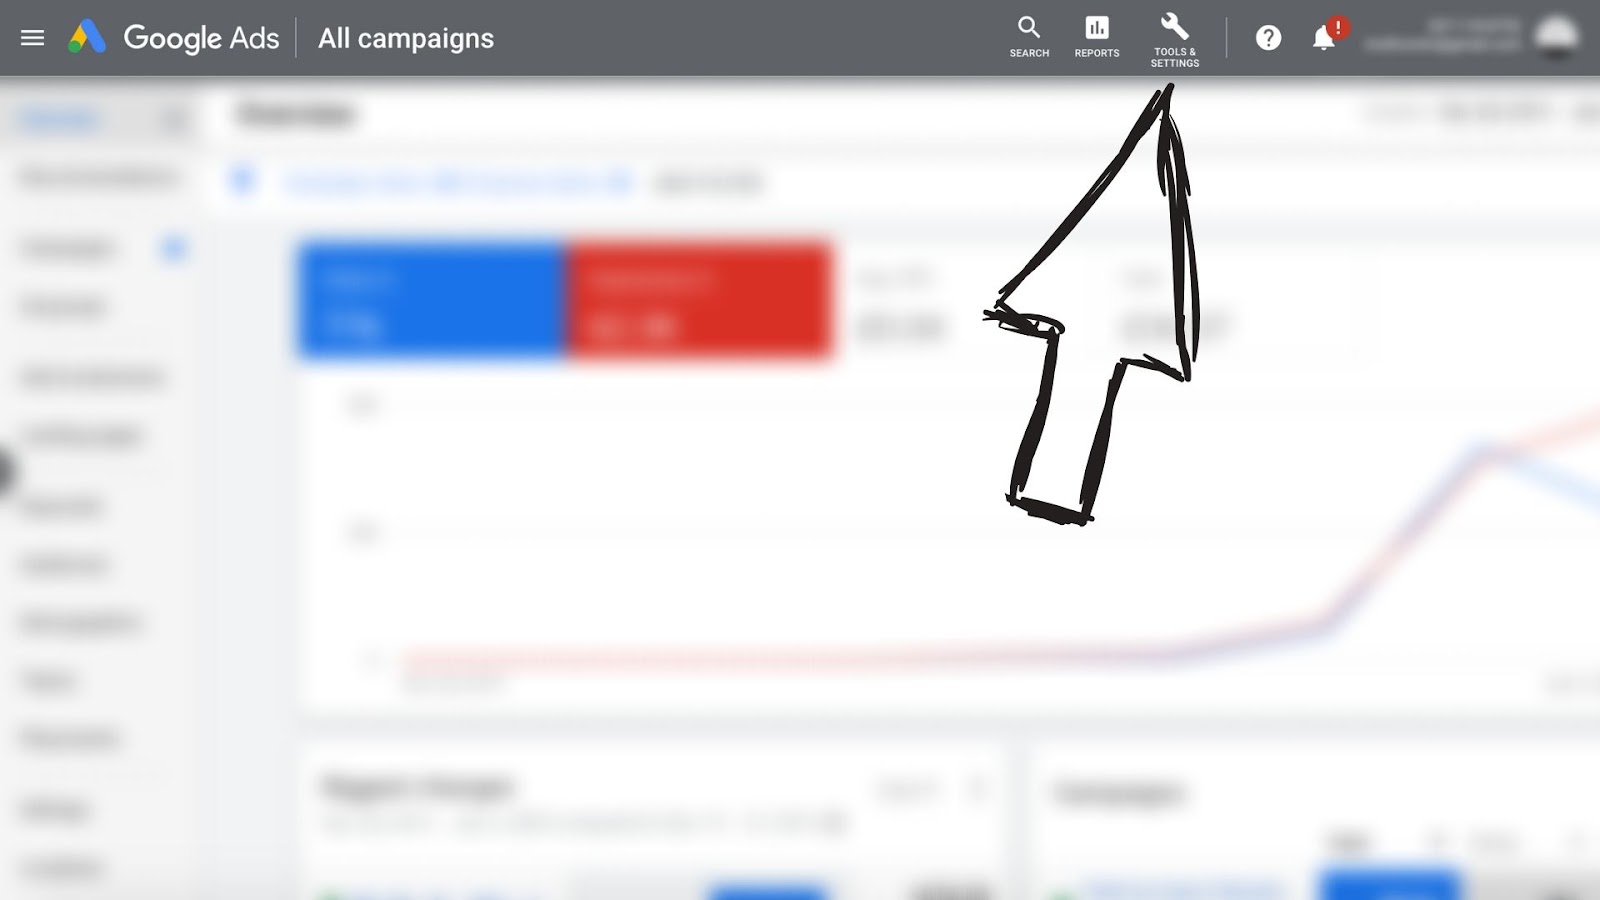 Google Ads Walkthrough: How To Set Up Successful Re-Marketing, Display, Text, and Video Campaigns Display